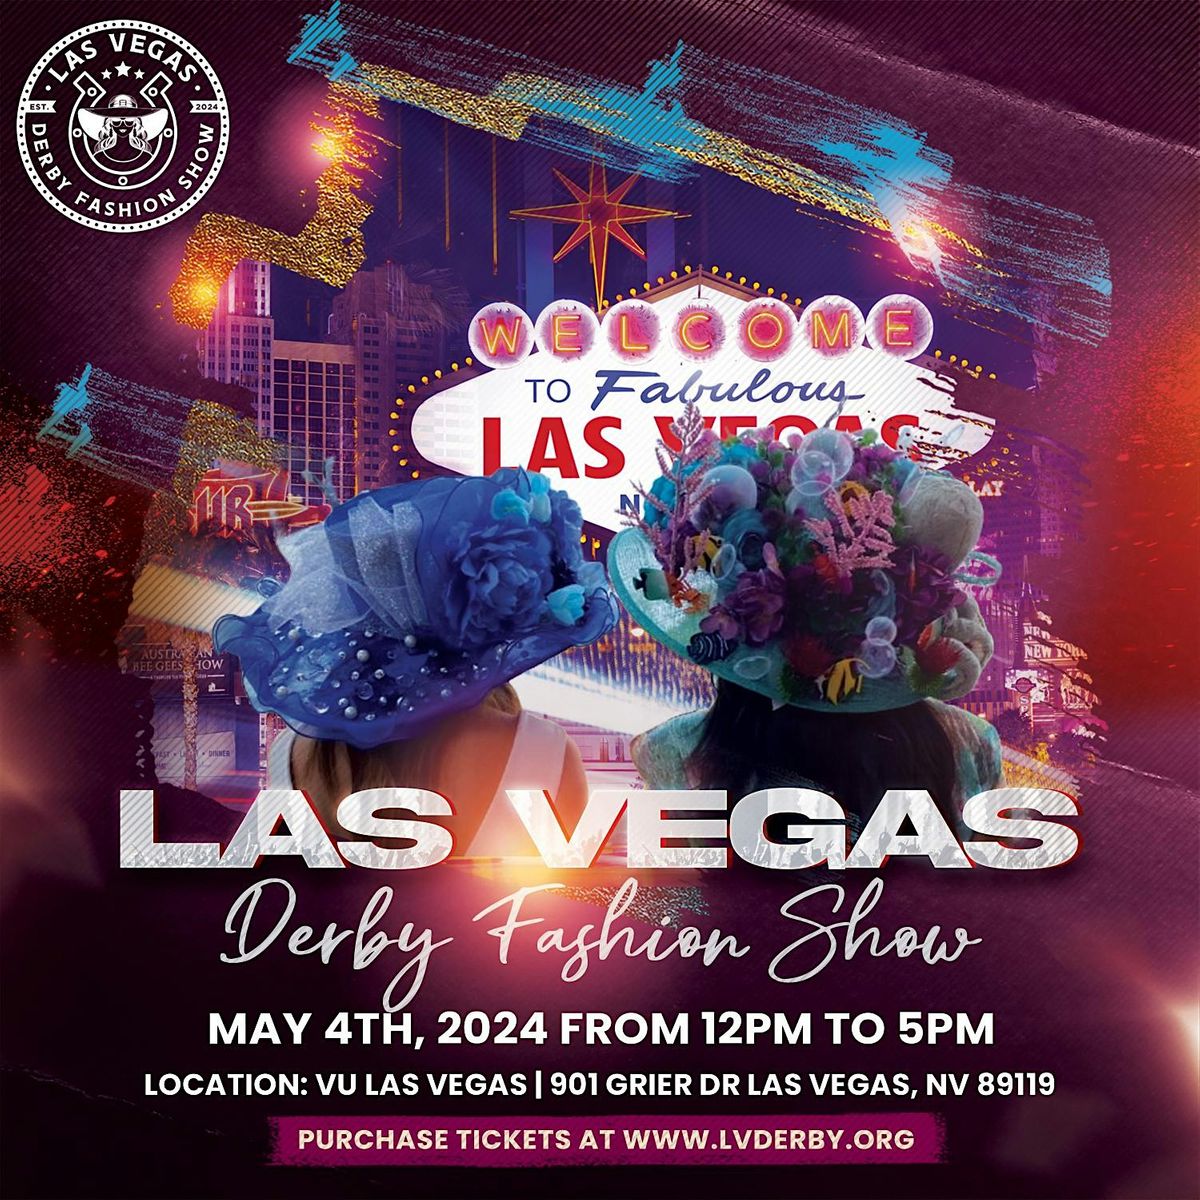 Las Vegas Derby Fashion Show and Watch Party